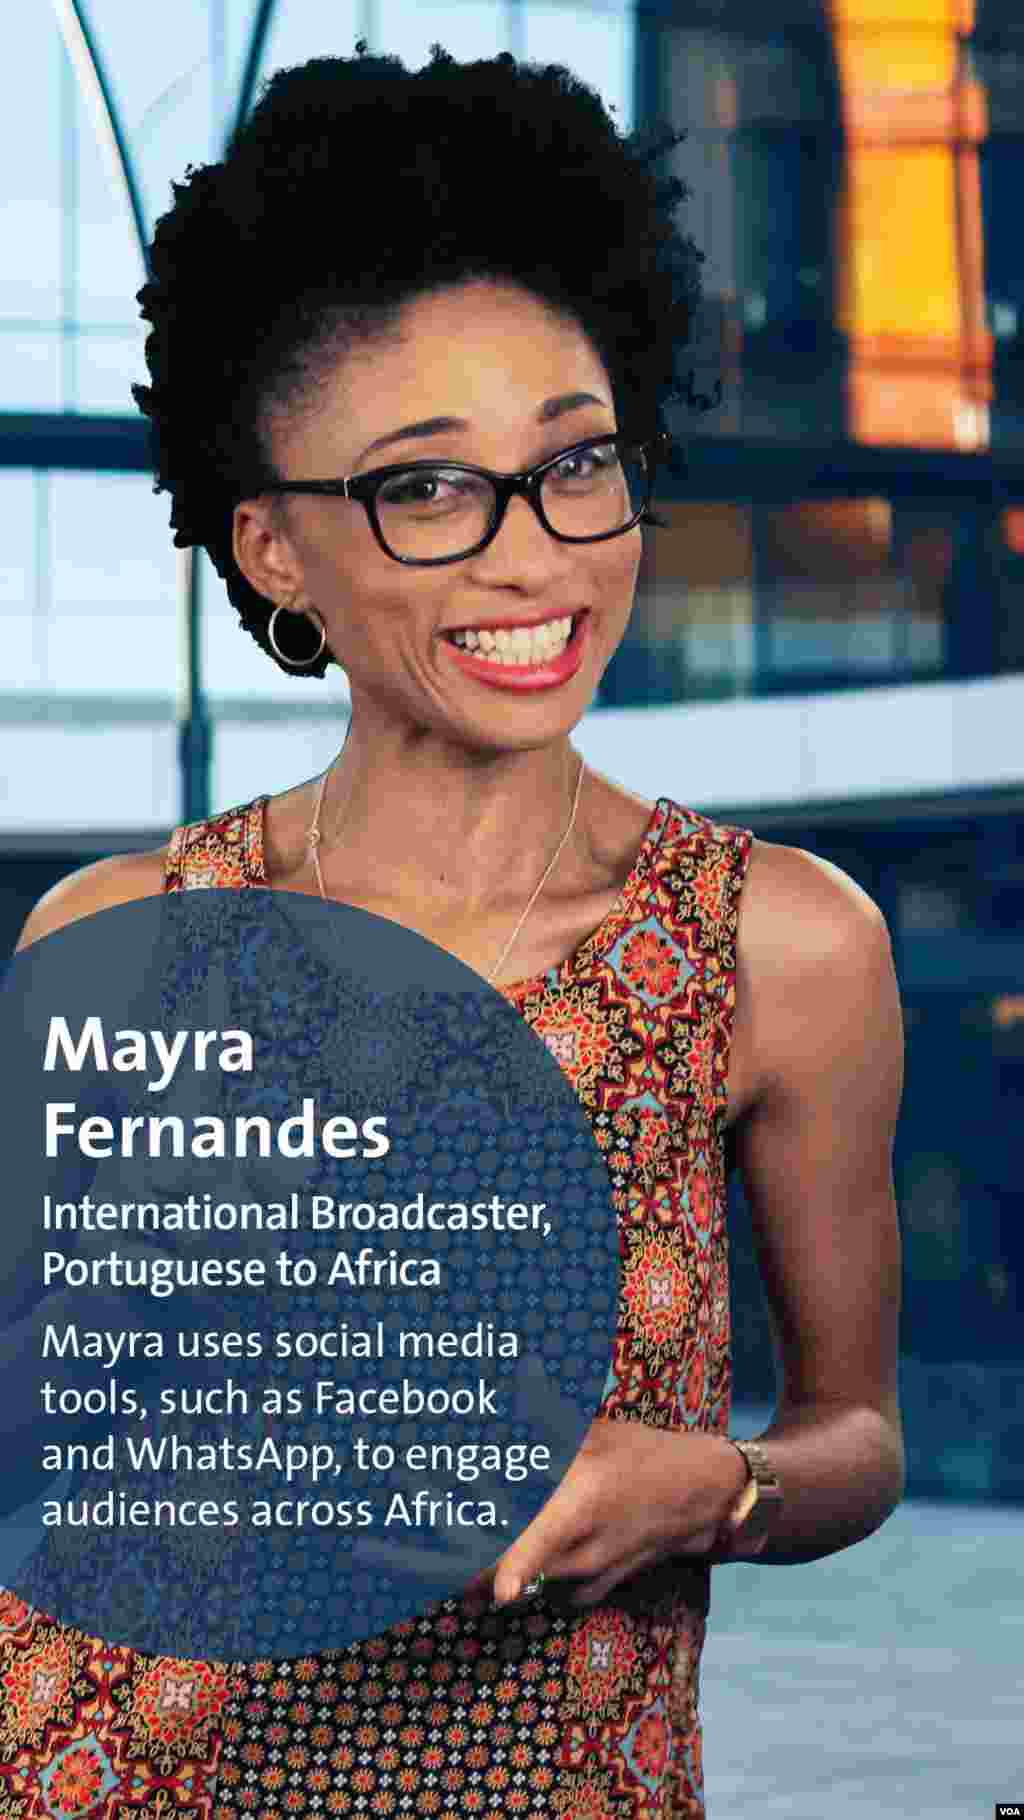 Mayra Fernandes is an international broadcaster for VOA Portuguese to Africa.&nbsp;